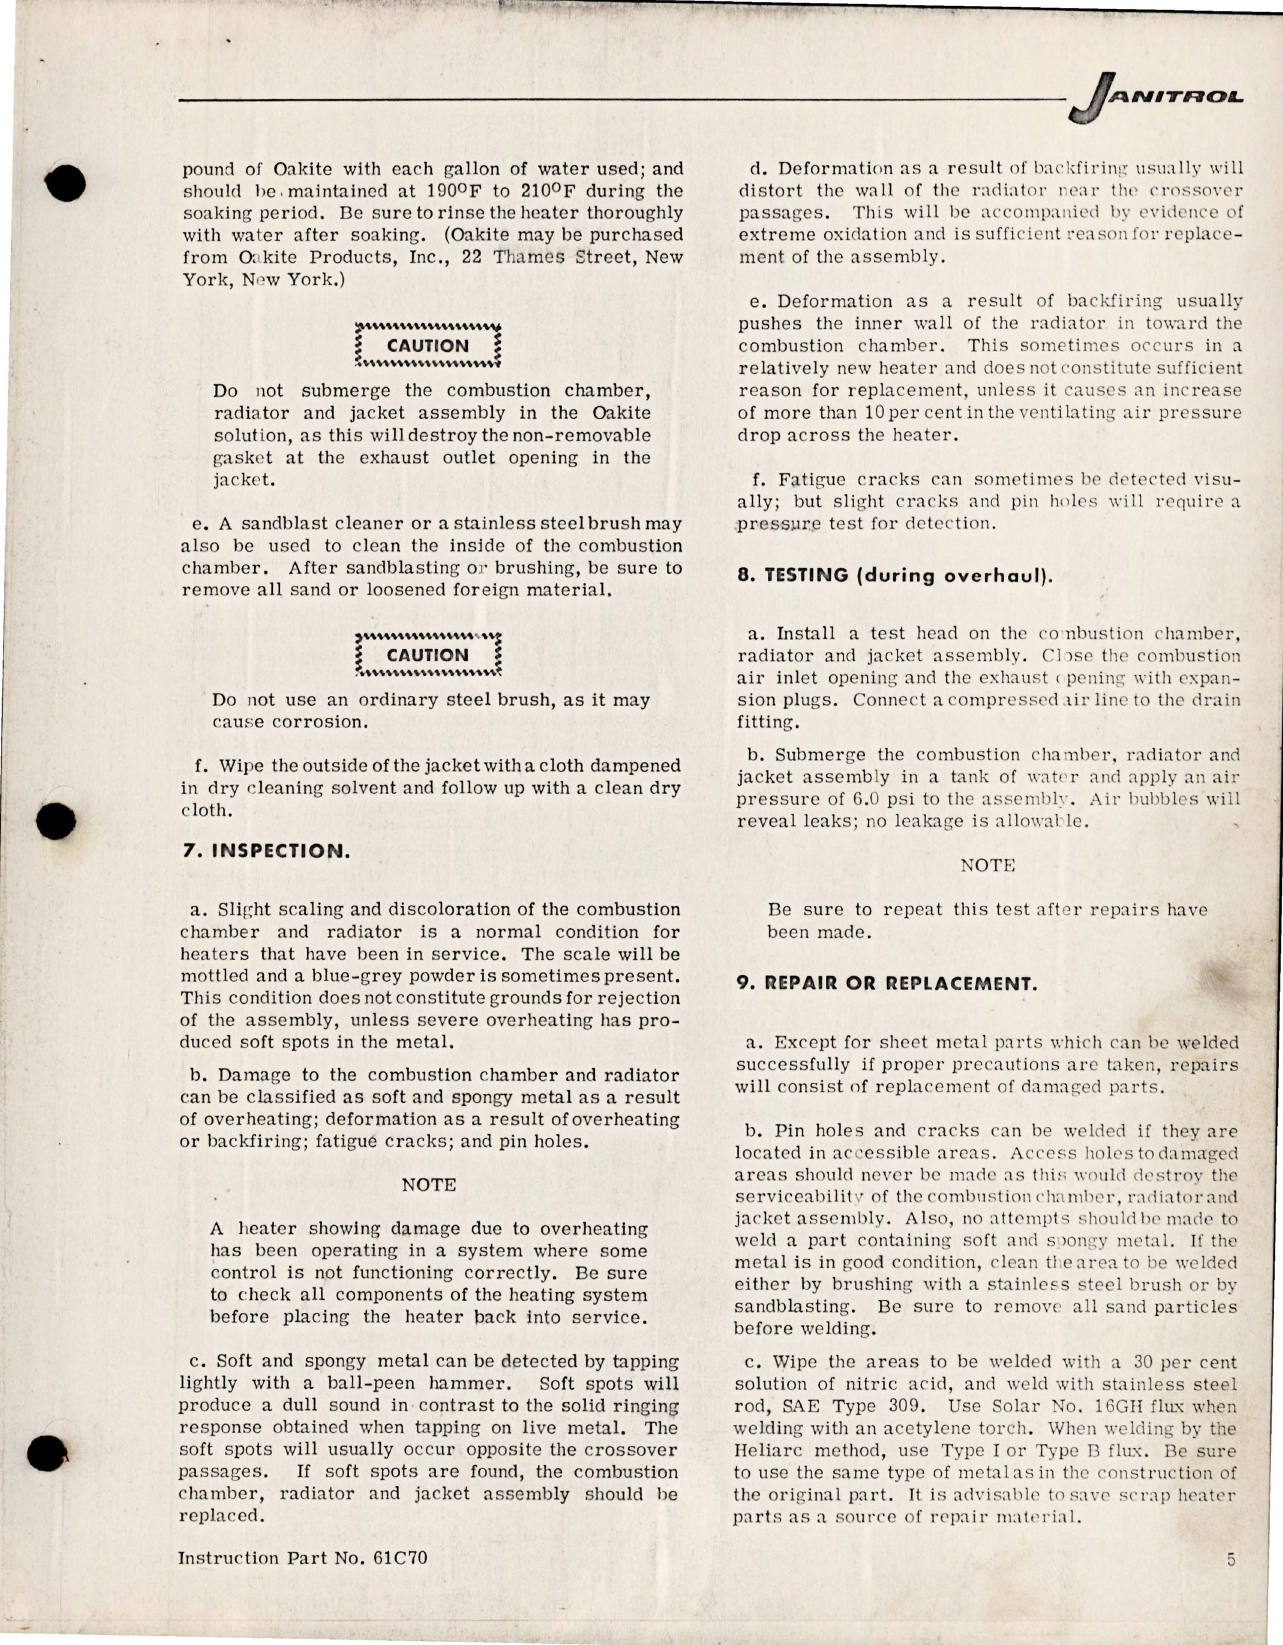 Sample page 5 from AirCorps Library document: Maintenance Instructions for Aircraft Heater - Part 58C26 - Type S-50 